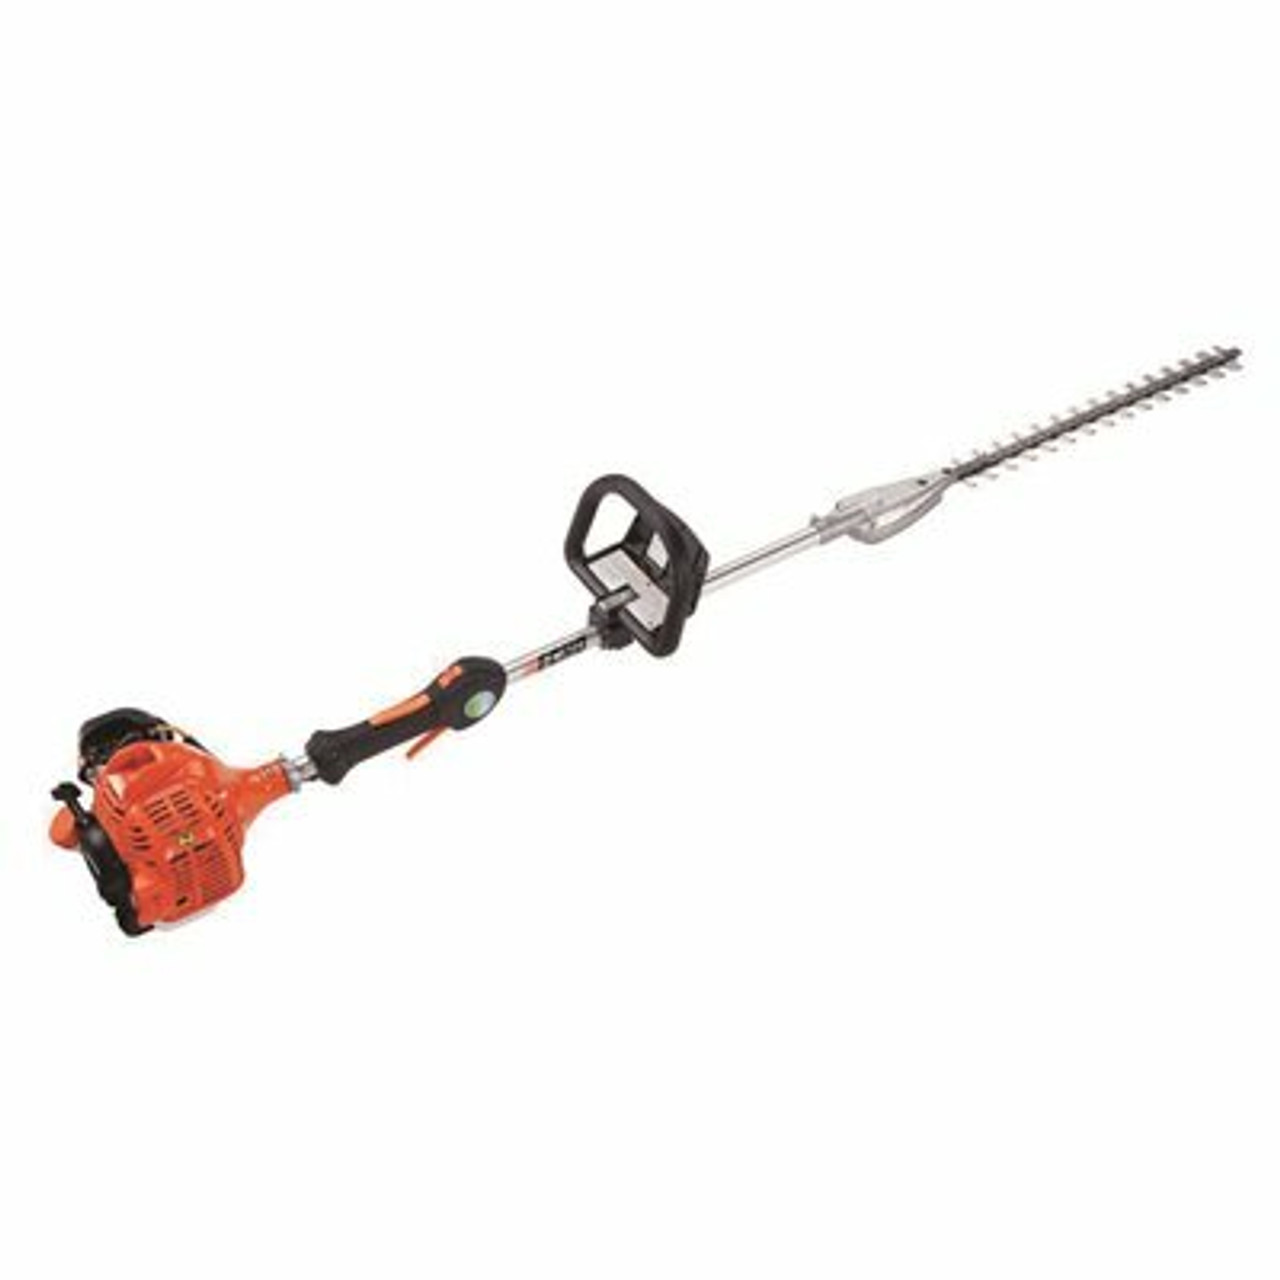 Echo 21 In. 21.2 Cc Gas 2-Stroke Cycle Hedge Trimmer - 100663461